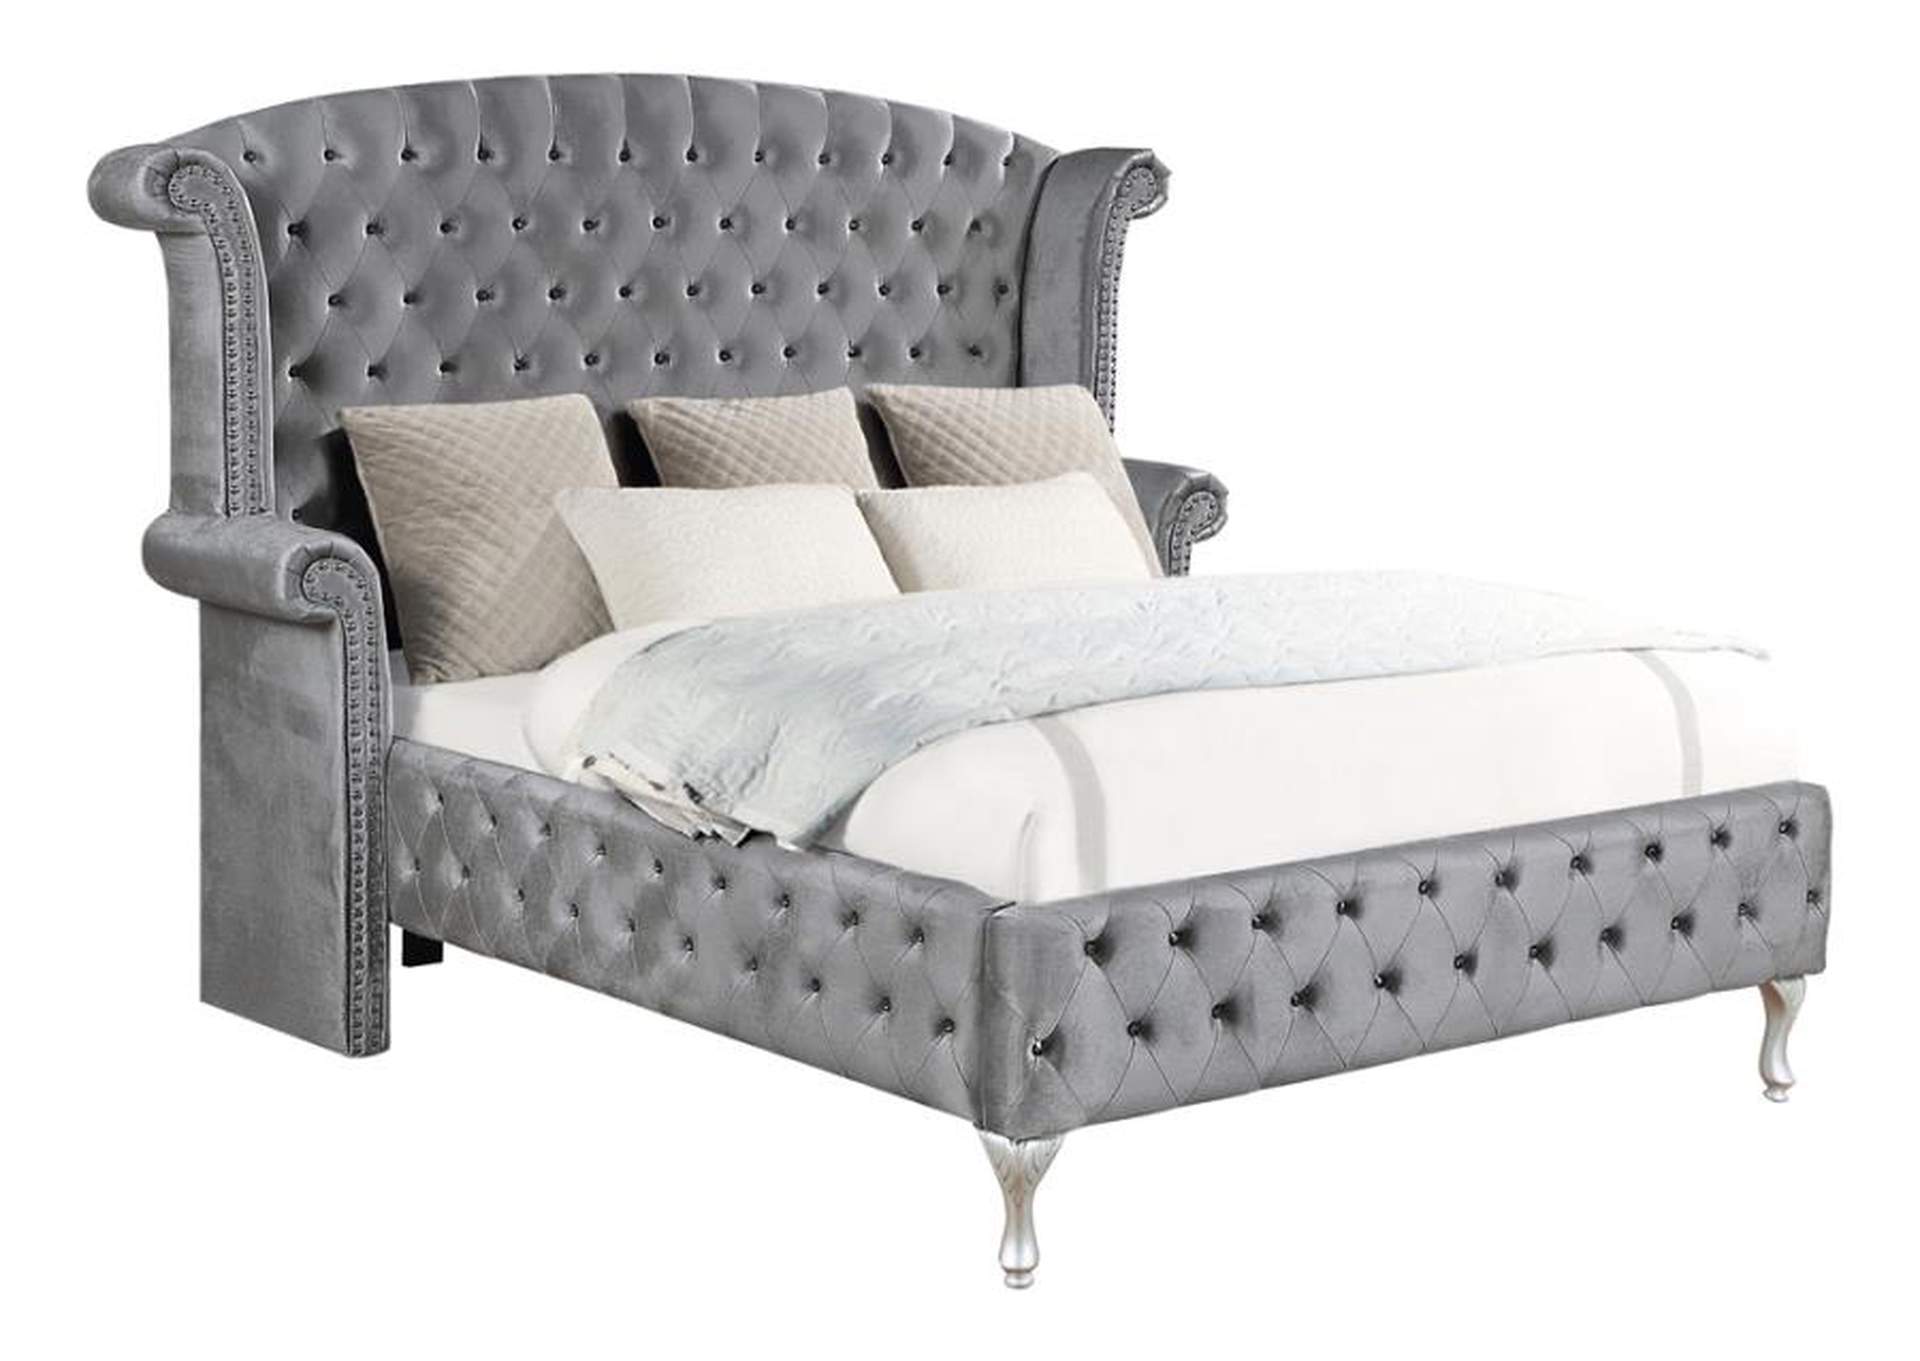 Deanna California King Tufted Upholstered Bed Grey,Coaster Furniture